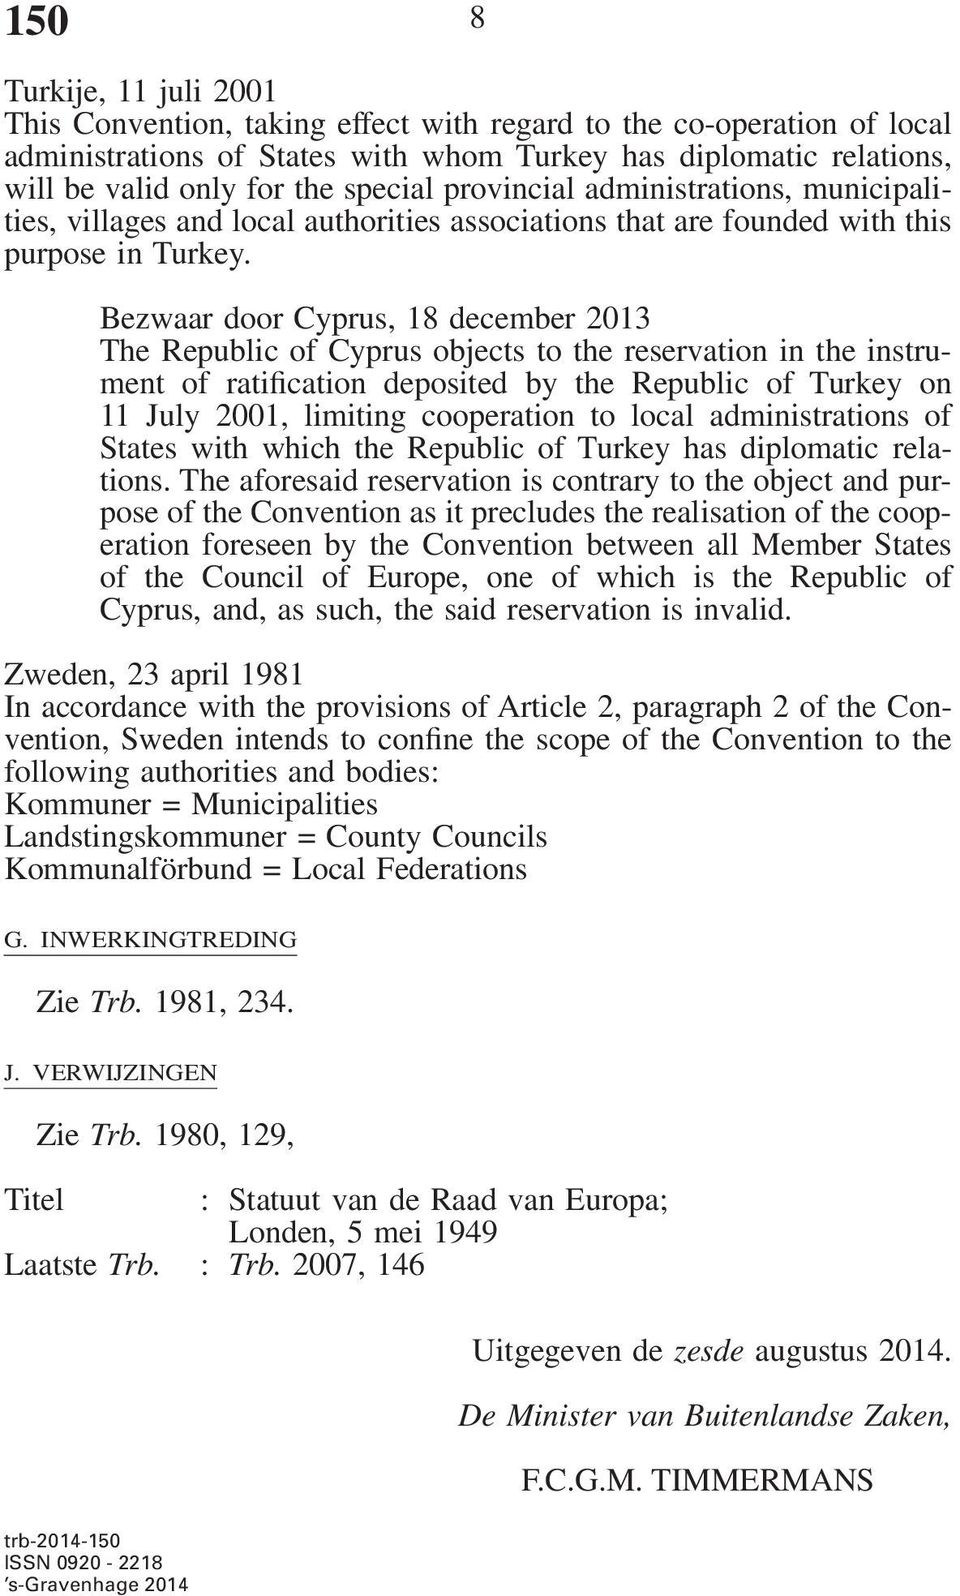 Bezwaar door Cyprus, 18 december 2013 The Republic of Cyprus objects to the reservation in the instrument of ratification deposited by the Republic of Turkey on 11 July 2001, limiting cooperation to